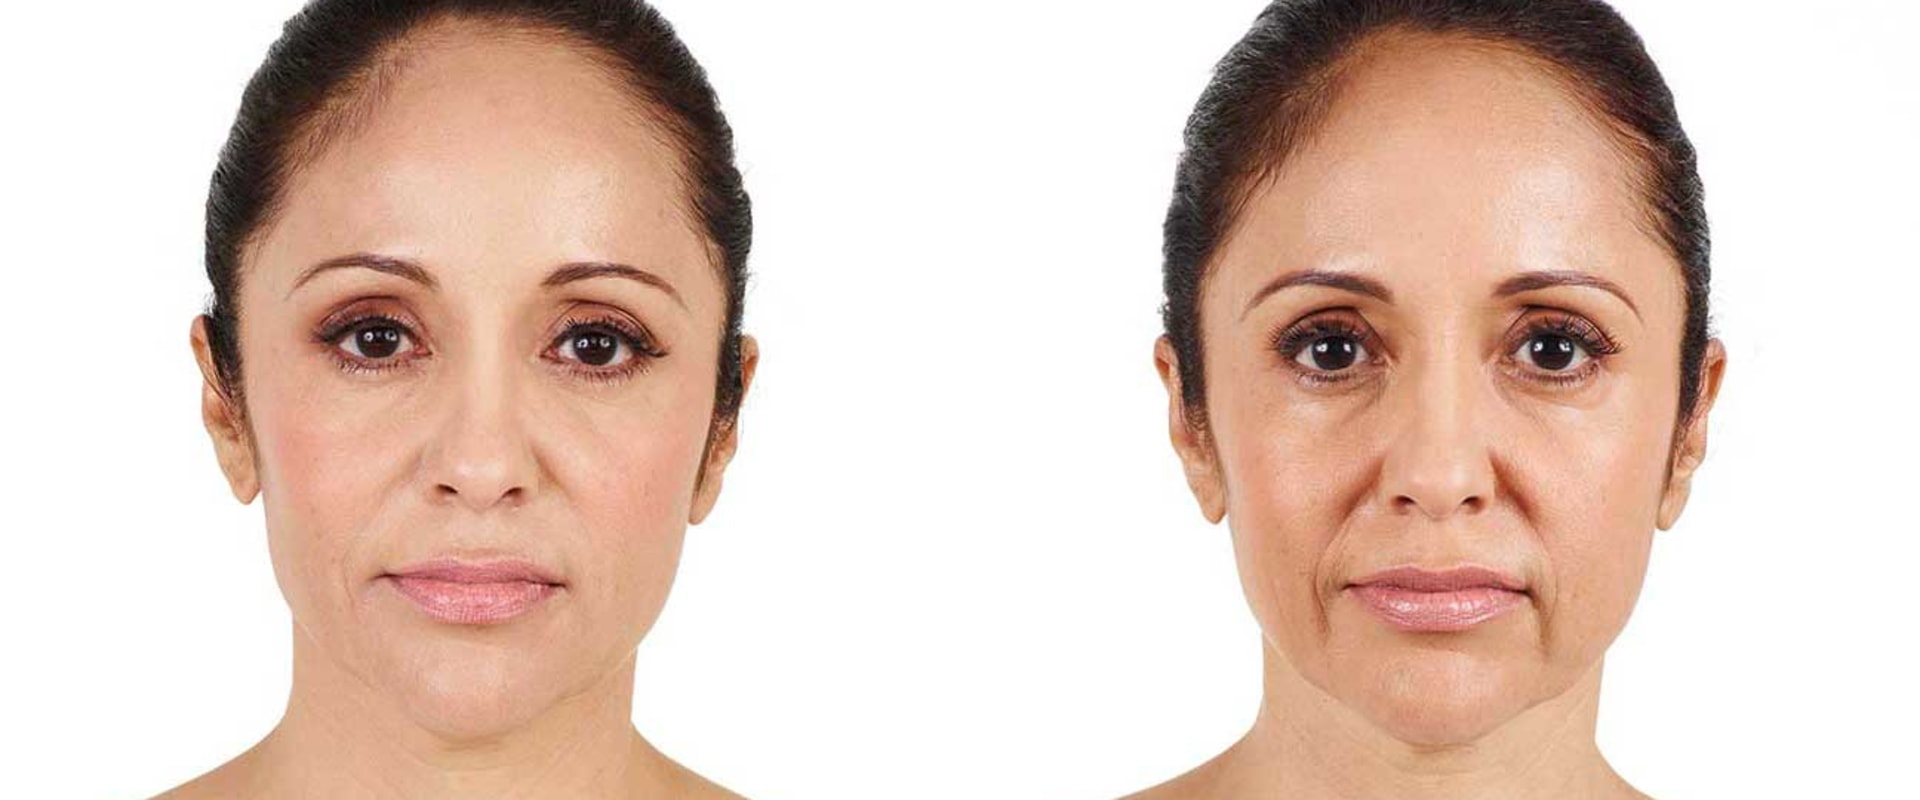 Juvederm Volux: The Best Non-Surgical Solution for Jowls